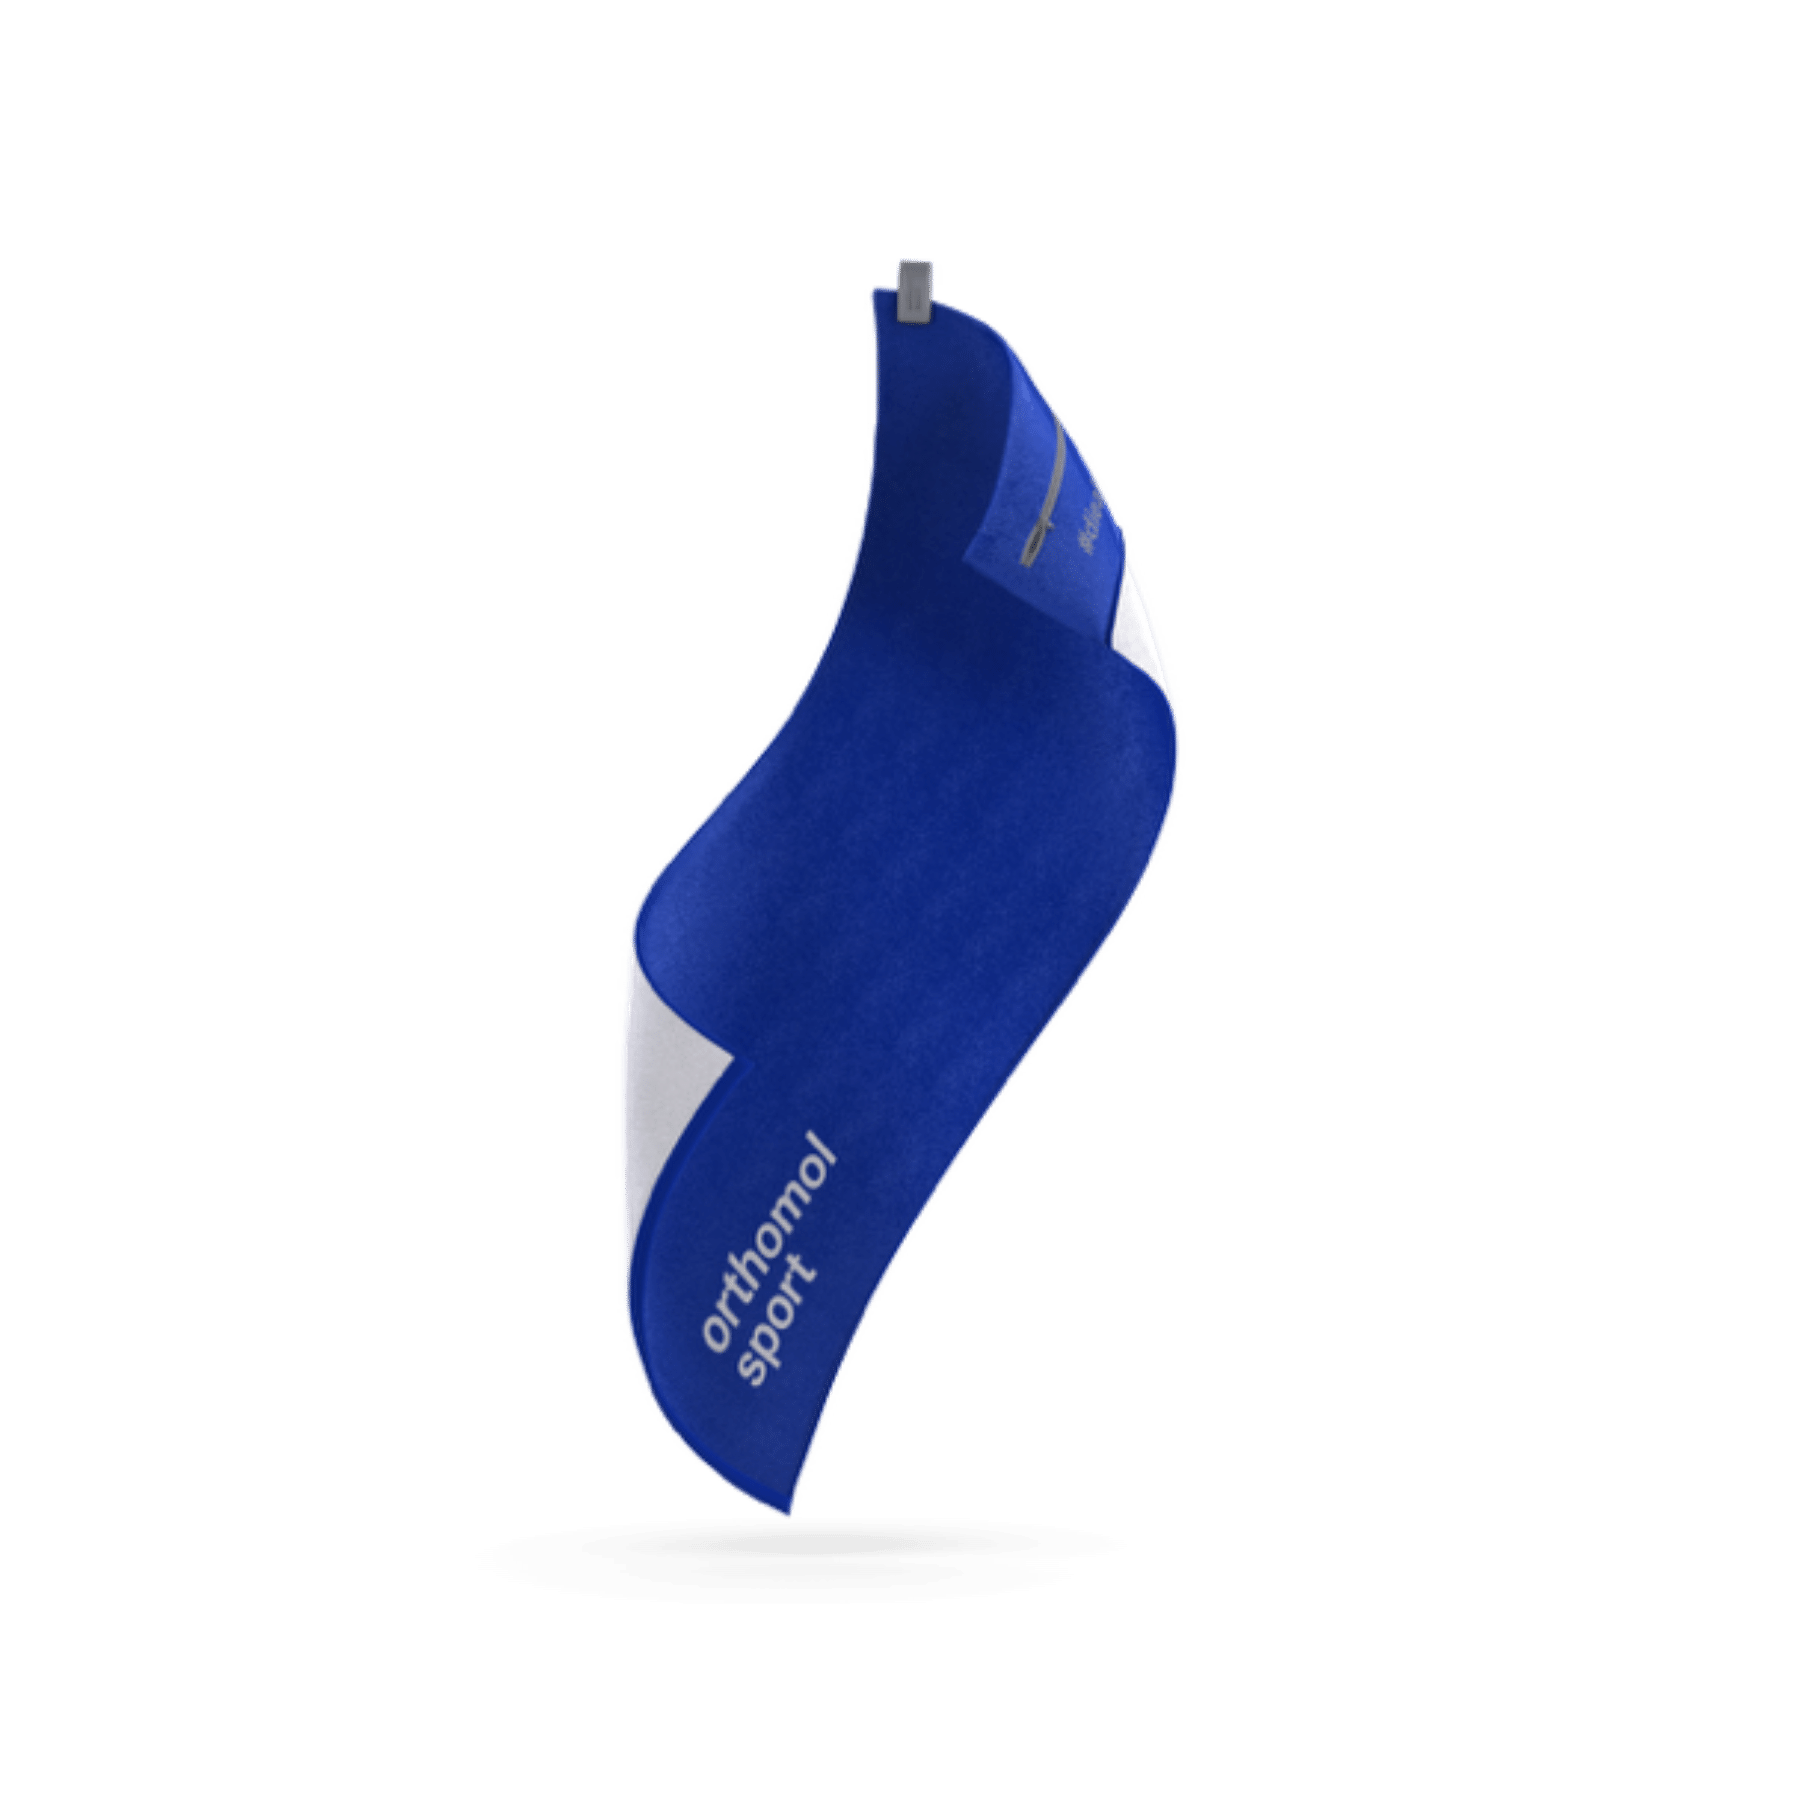 Orthomol Sport STRYVE Towell+ Pro Handtuch